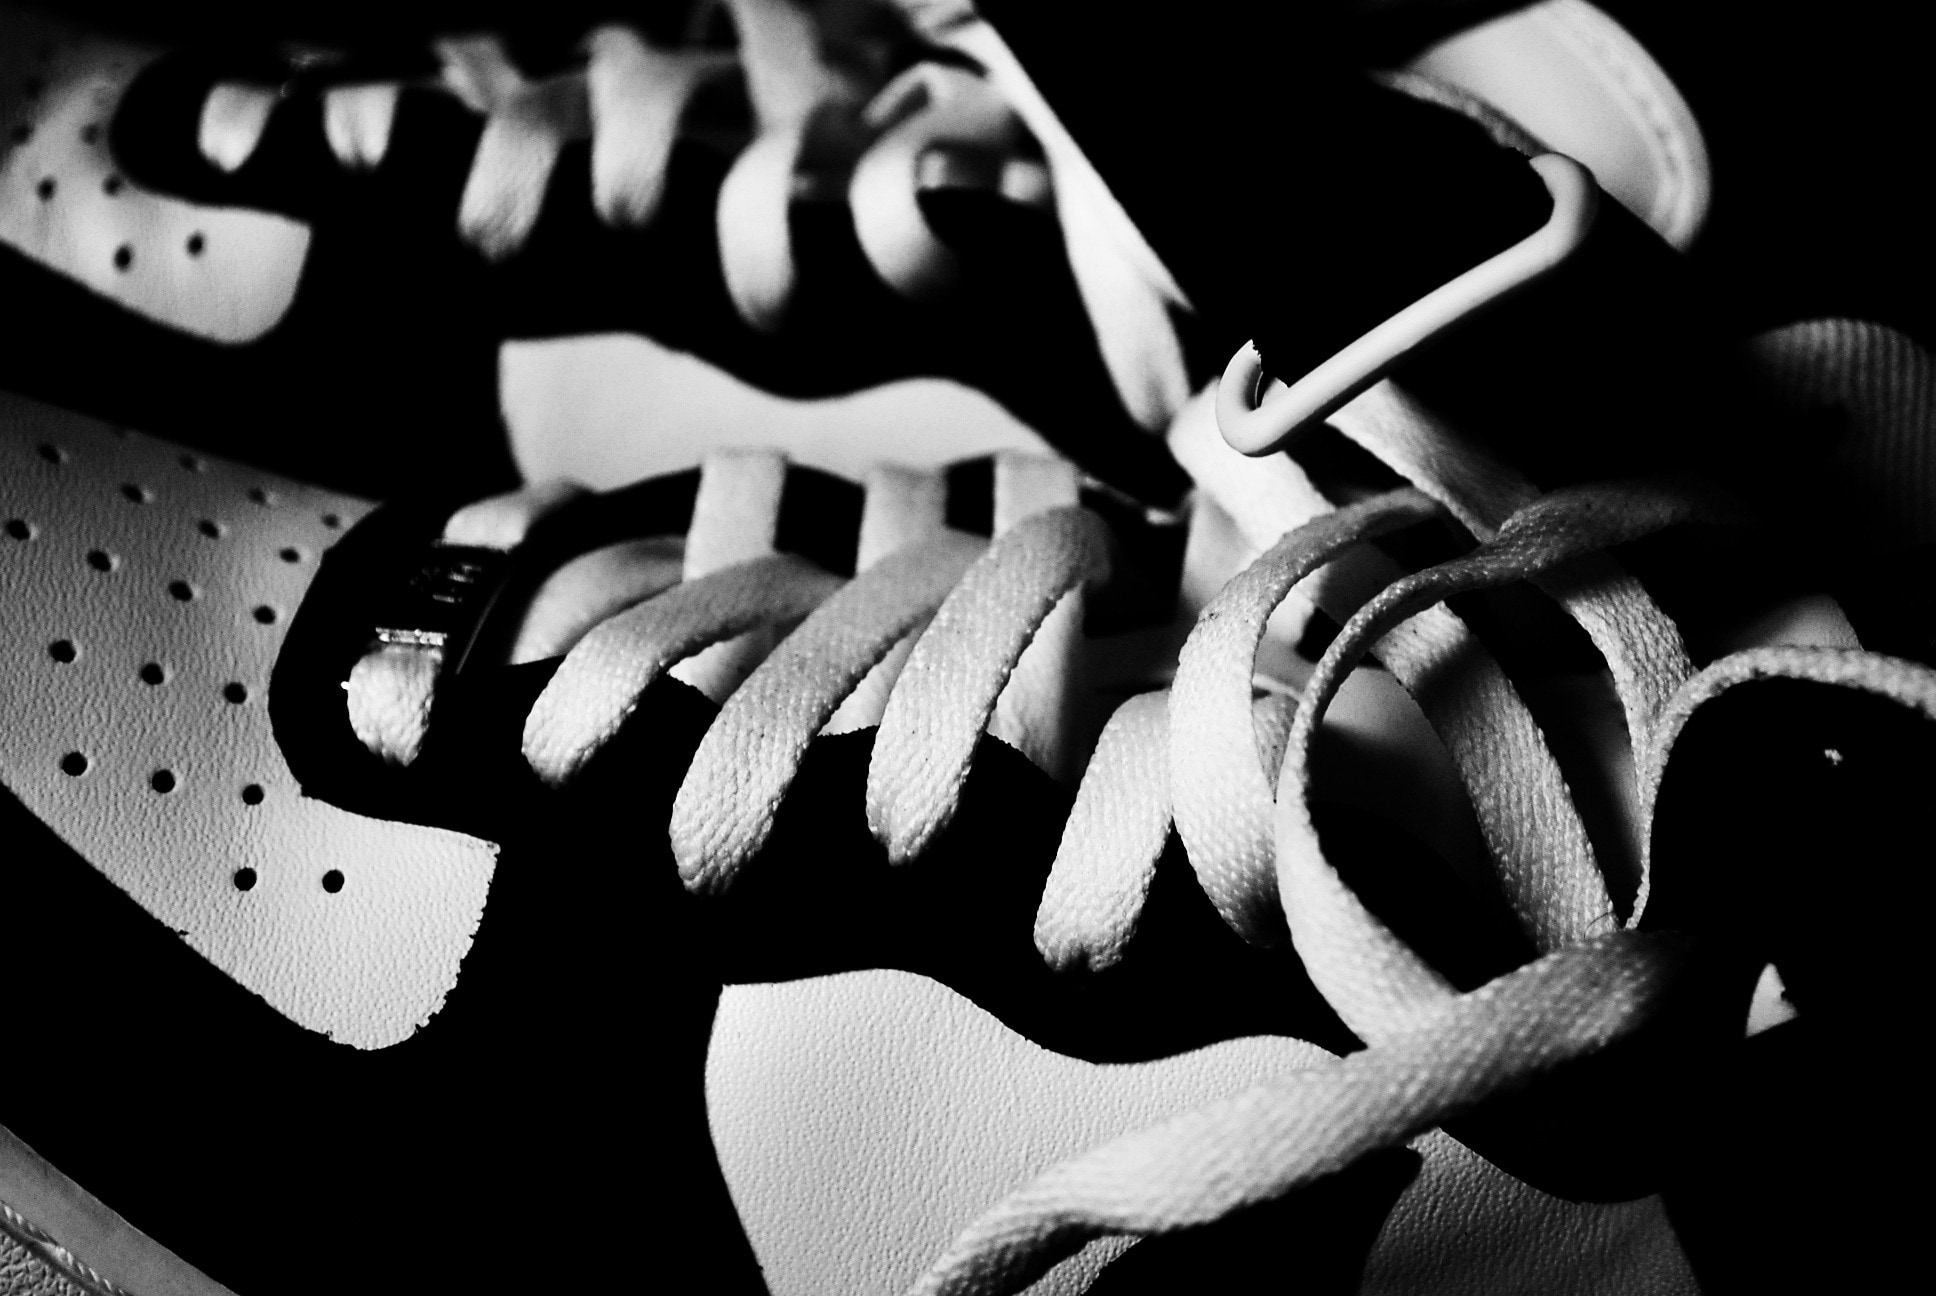 Nike, Sneakers, Laces, Shoes, Binding, no people, close-up